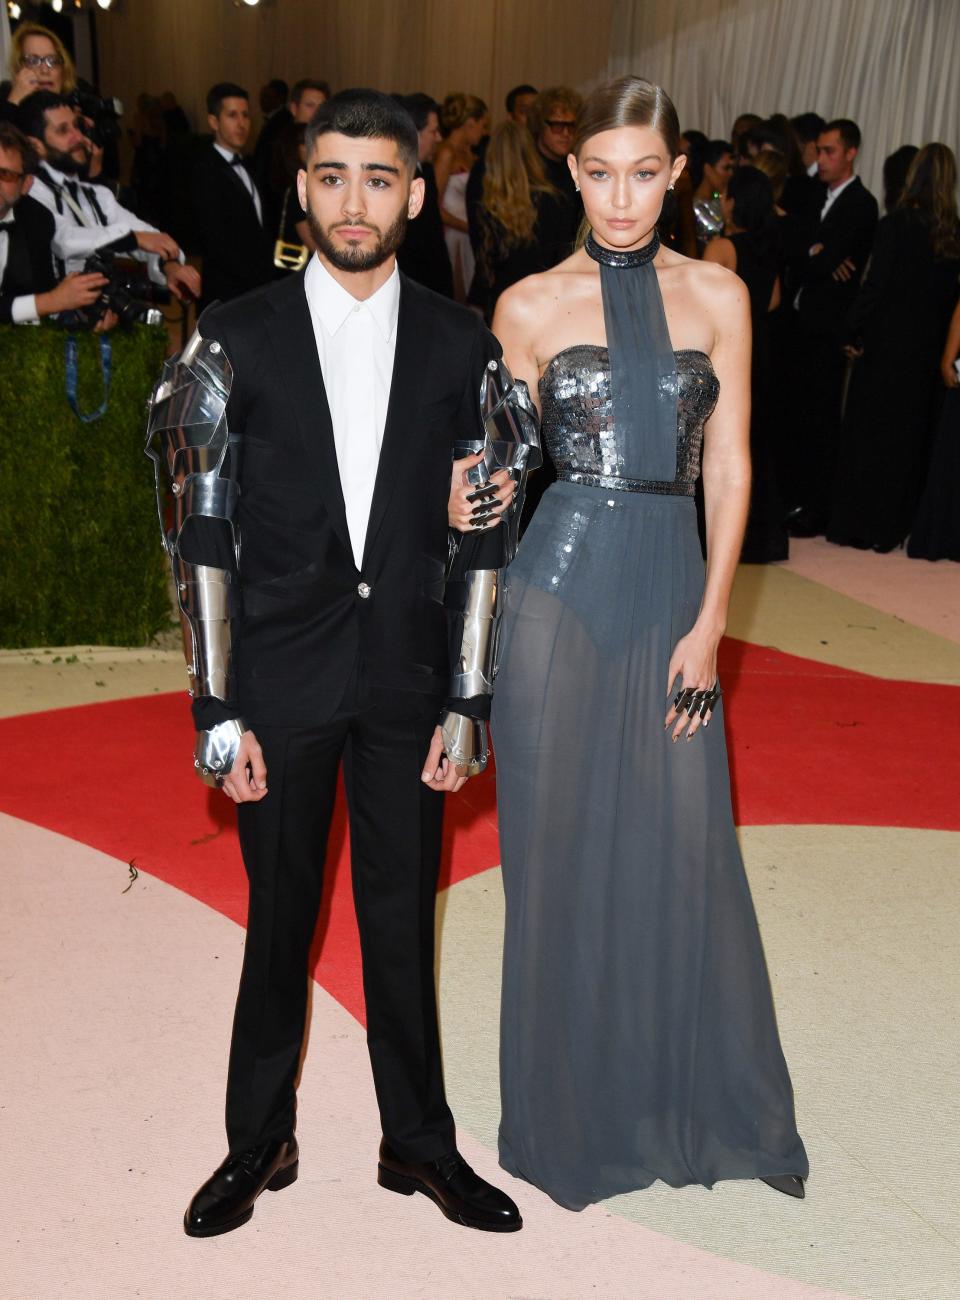 Zayn Malik stands in a suit and Gigi Hadid holds his arm wearing a grey dress on a red carpet.